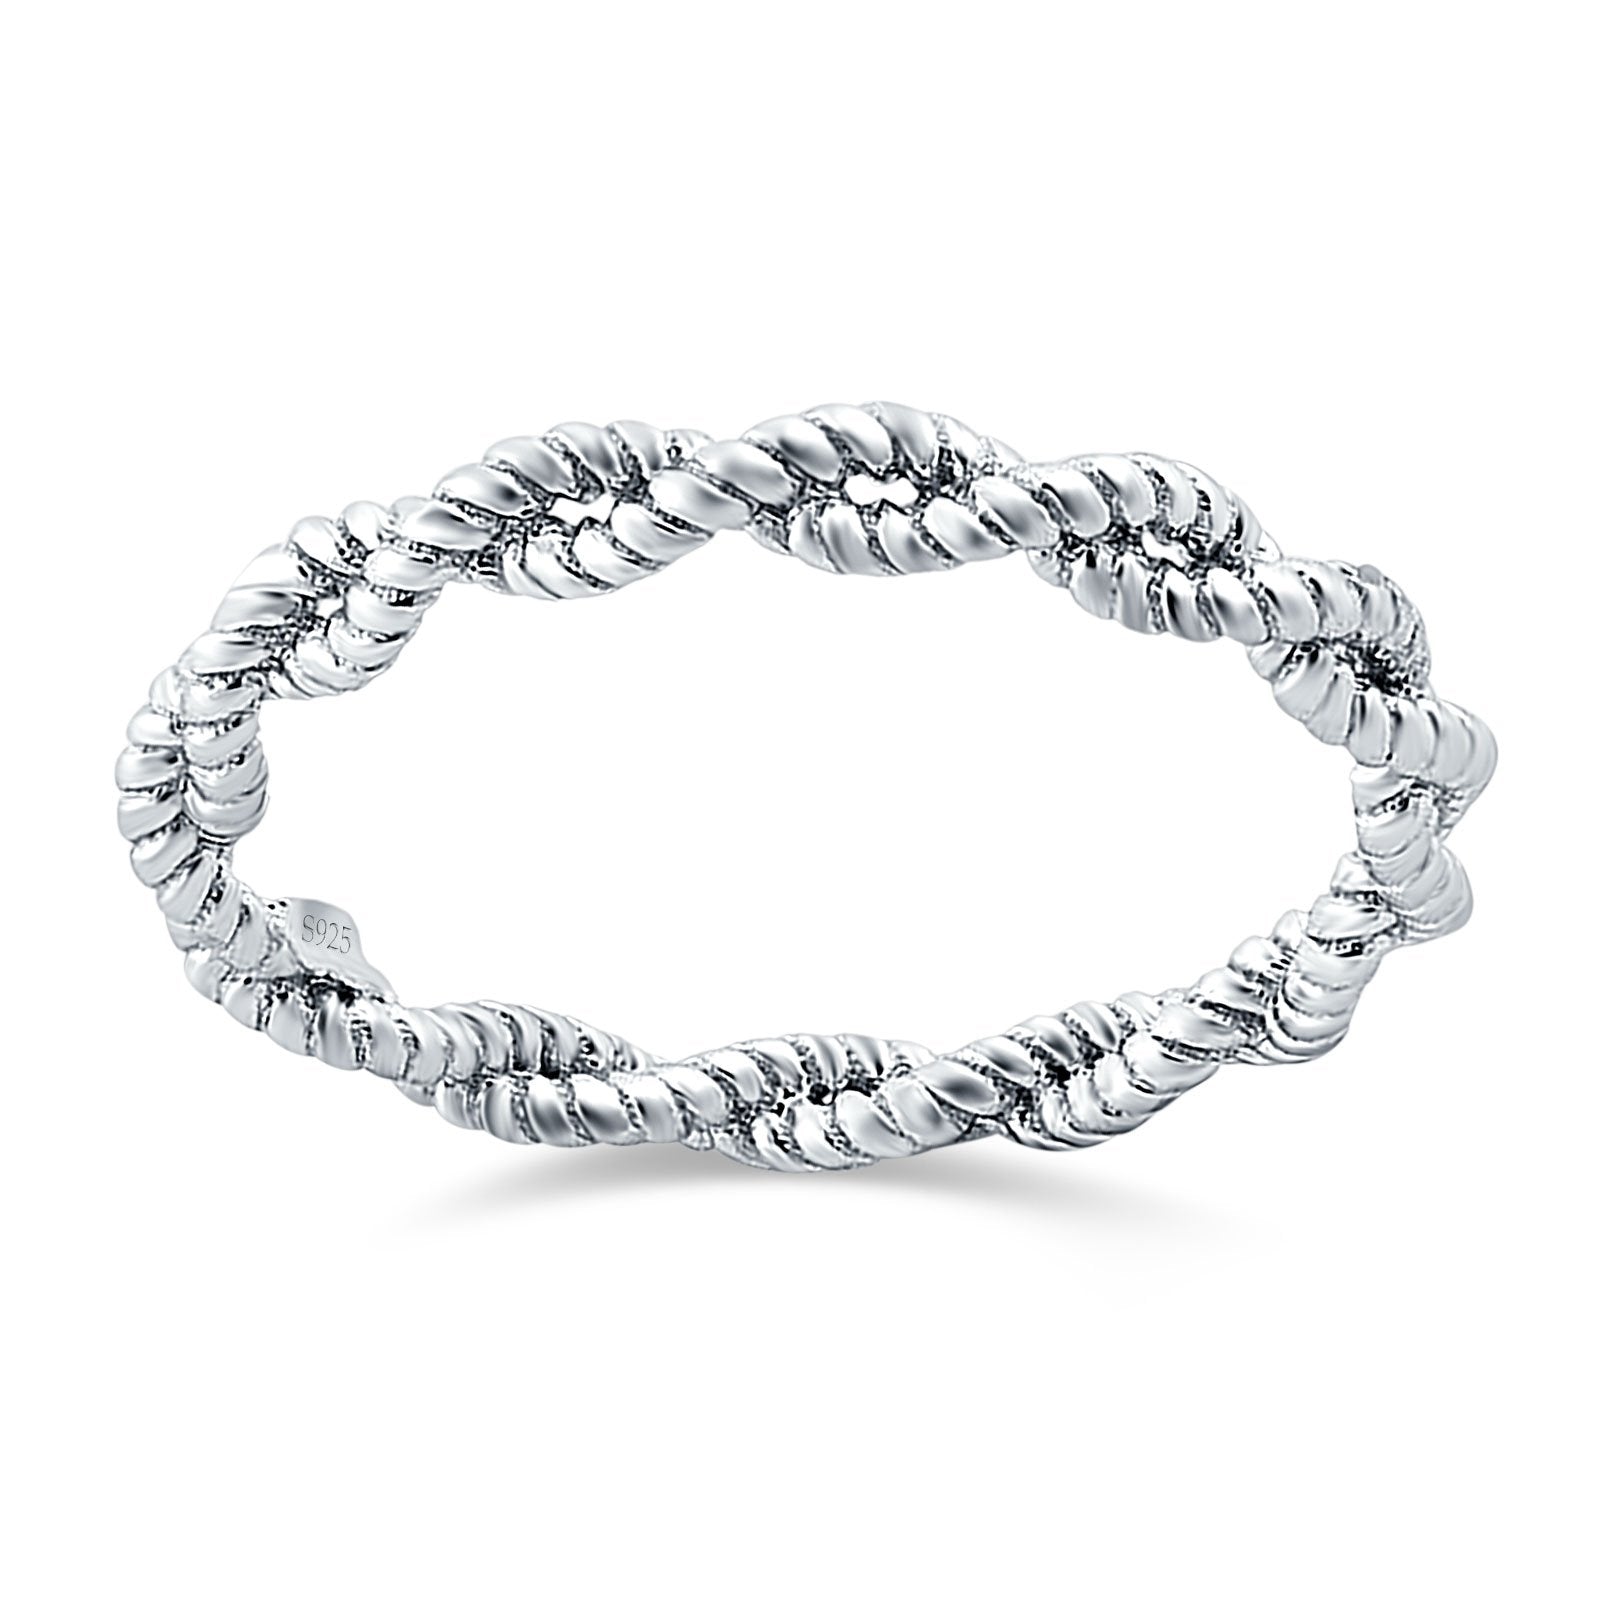 Rope Braided Band Solid 925 Sterling Silver (4mm) Unisex Men Women Wedding Band